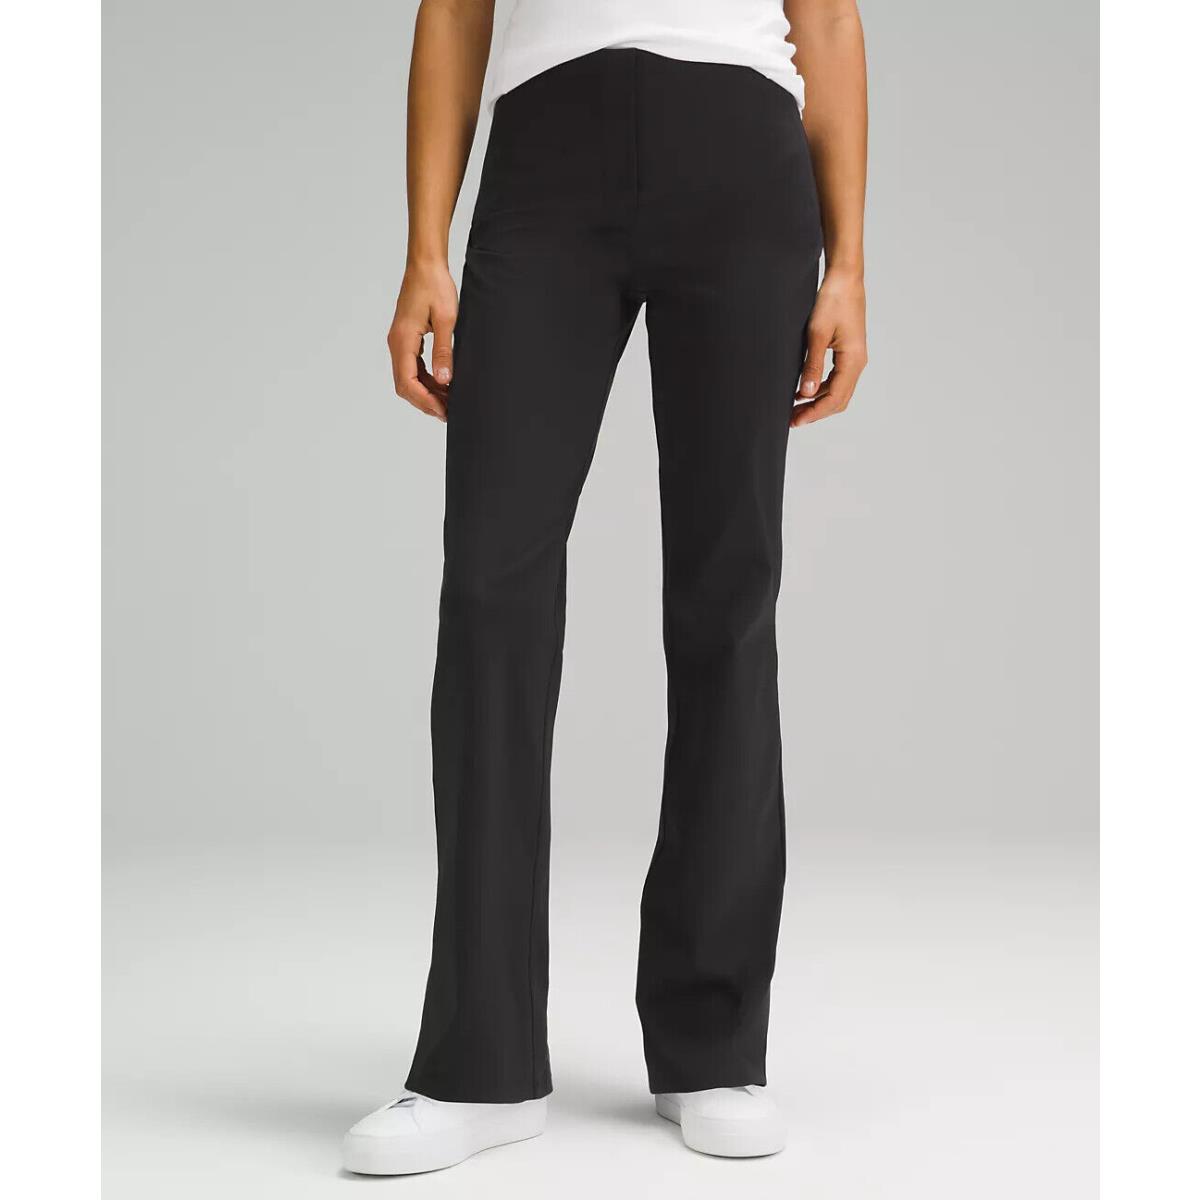 Lululemon Smooth-fit Pull-on High Rise Pant - Retail